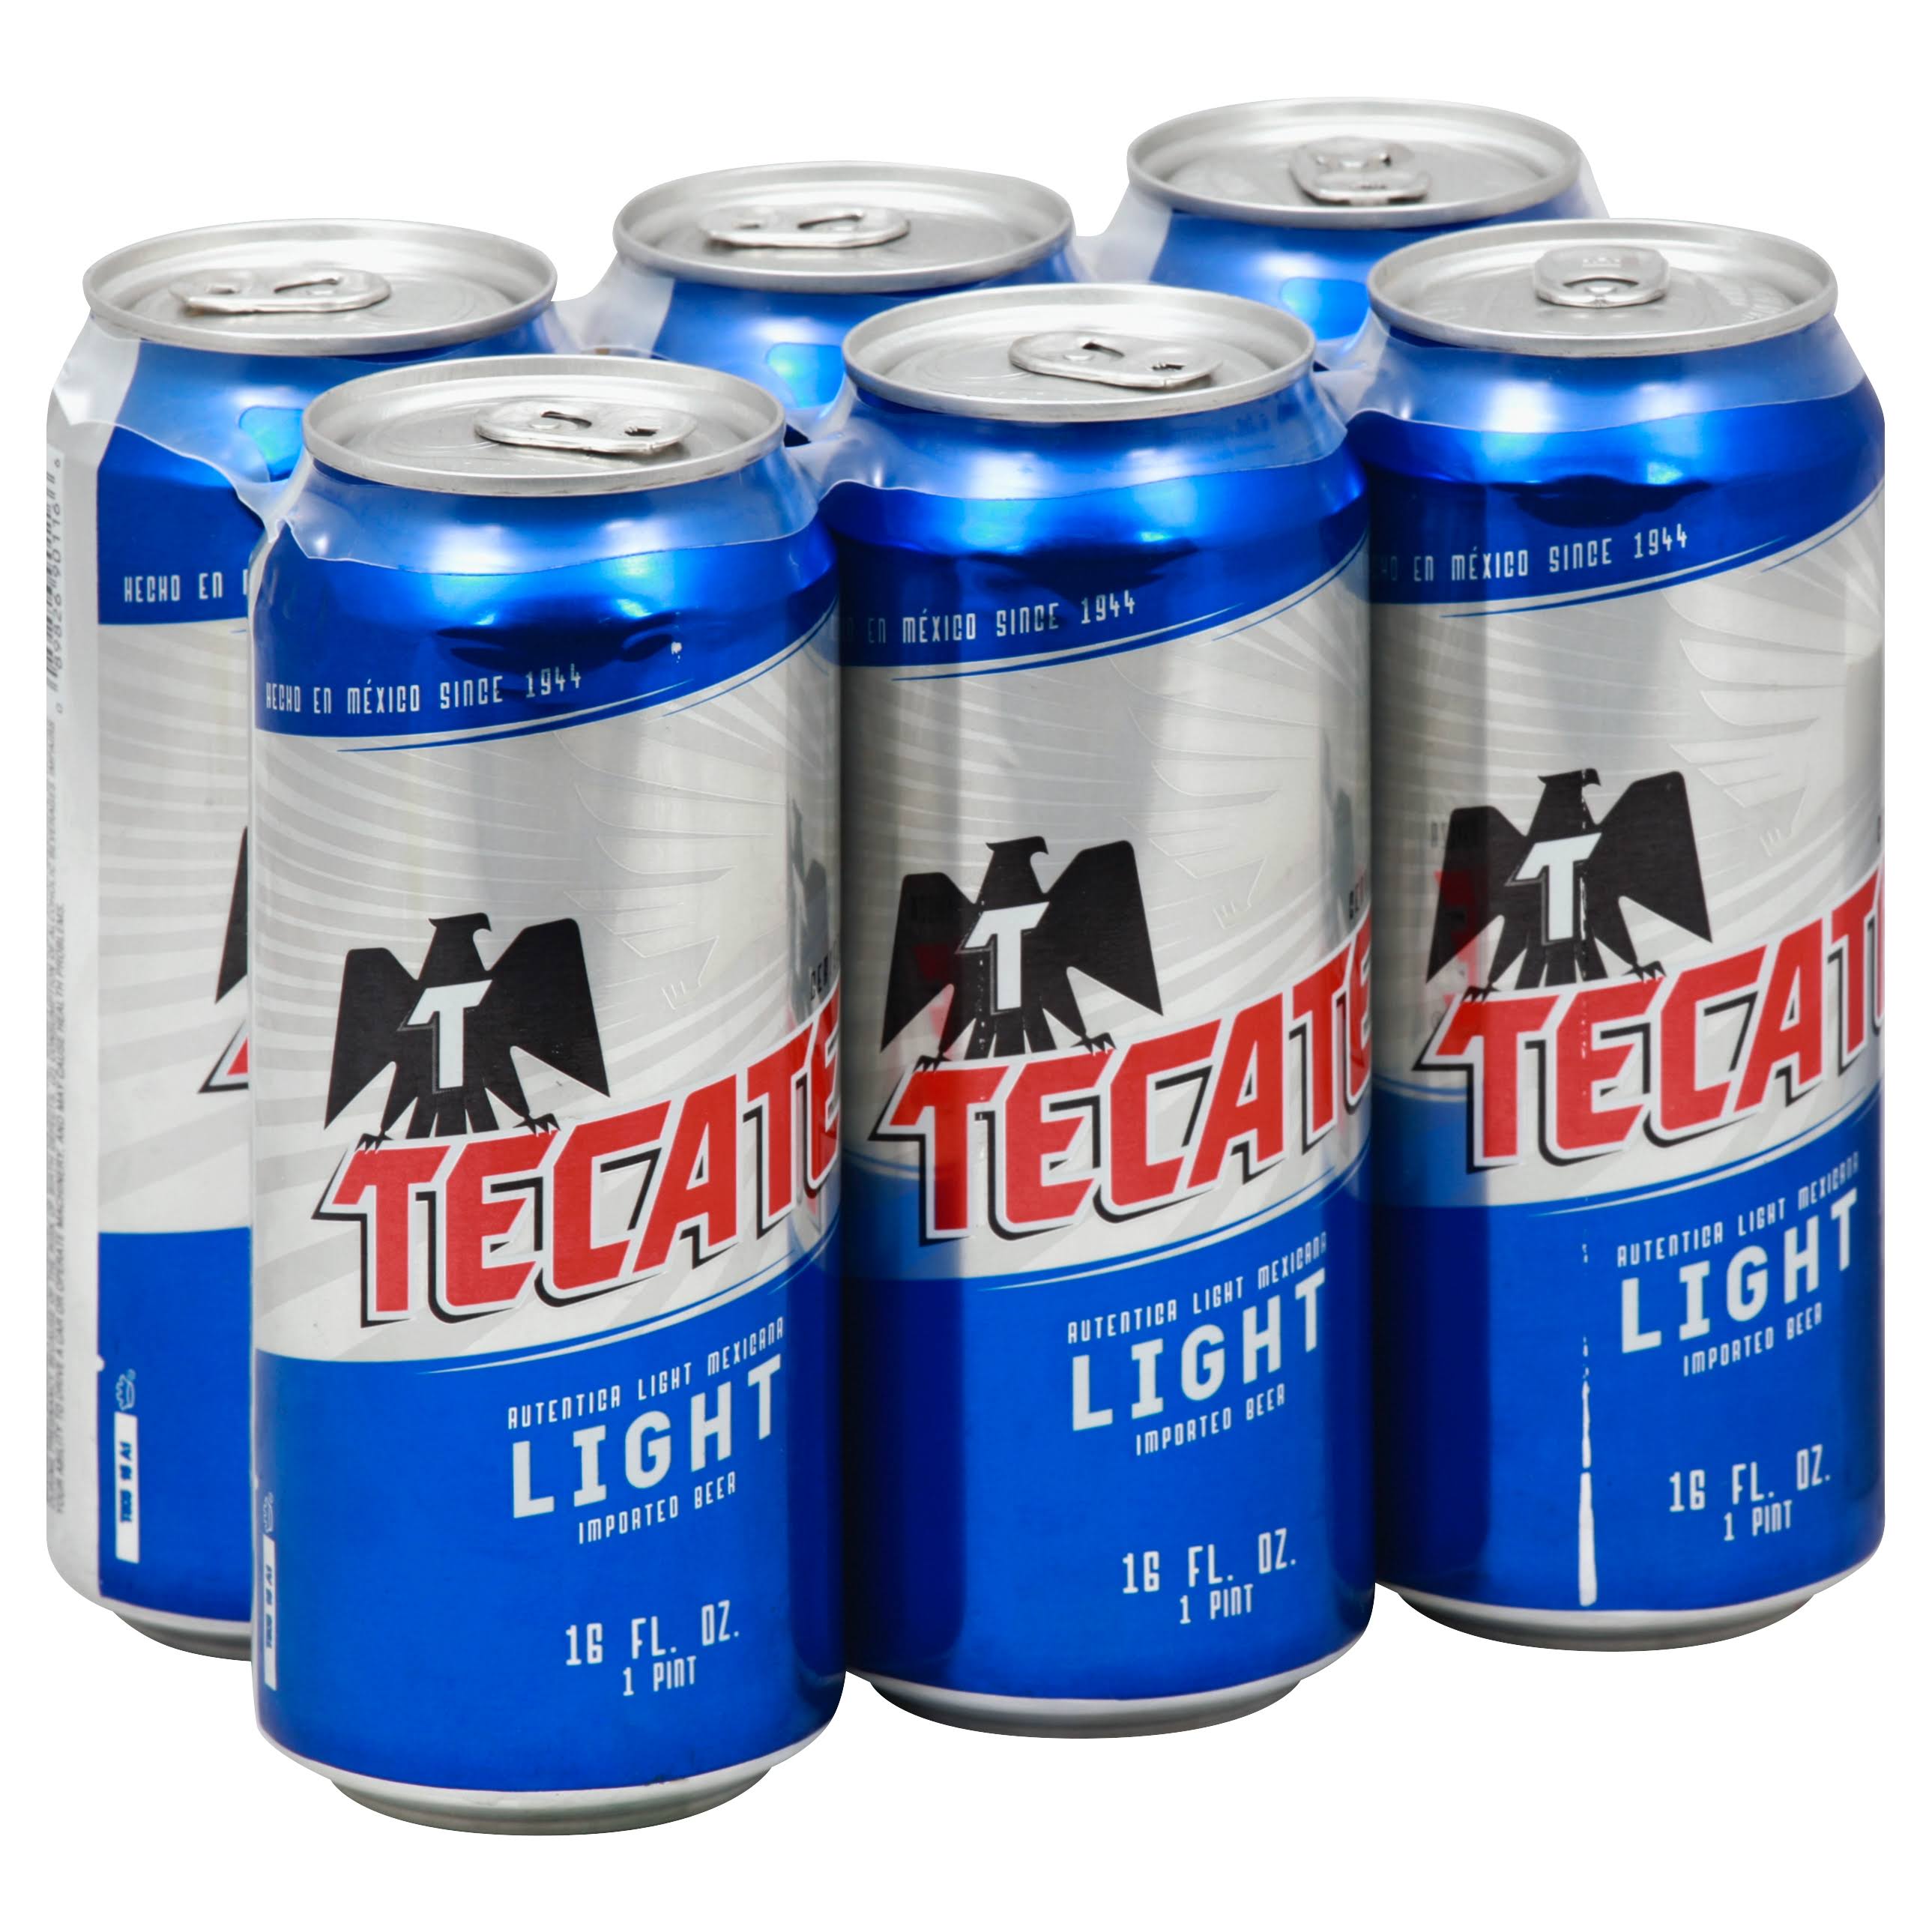 Tecate Beer, Light, Imported - 6 - 16 fl oz (1 pint) cans